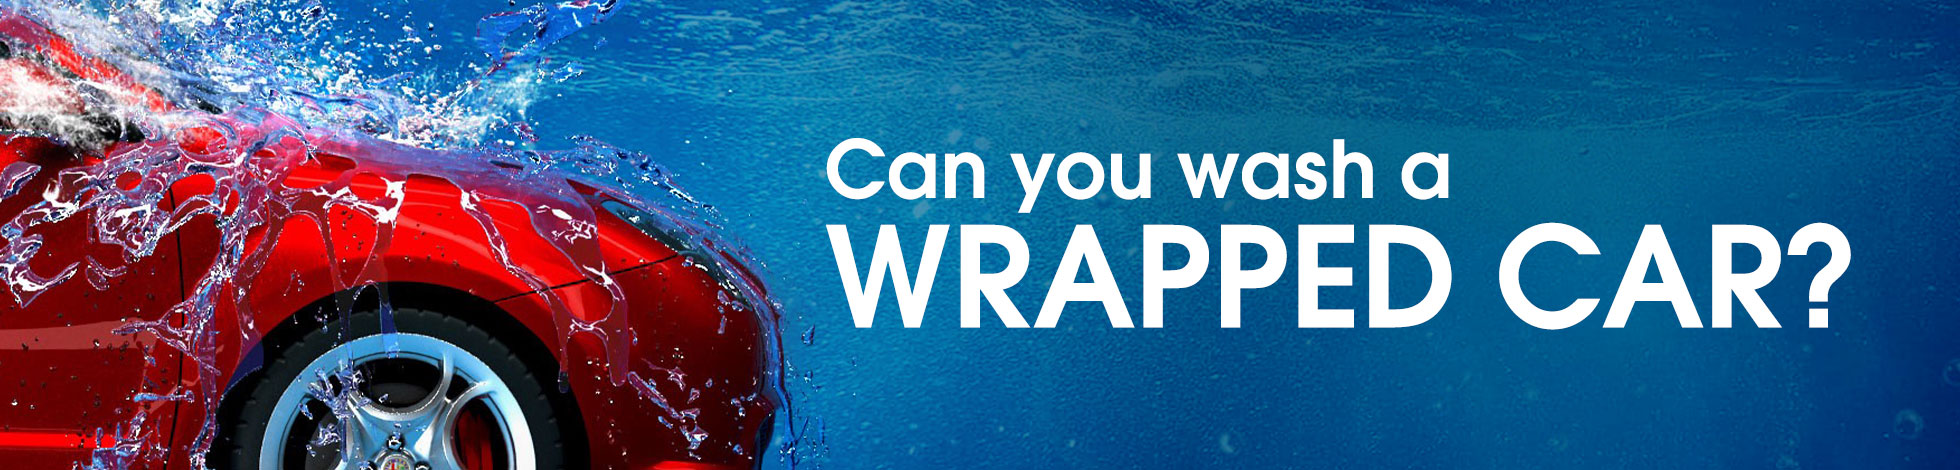 Can You Wash a Wrapped Car?